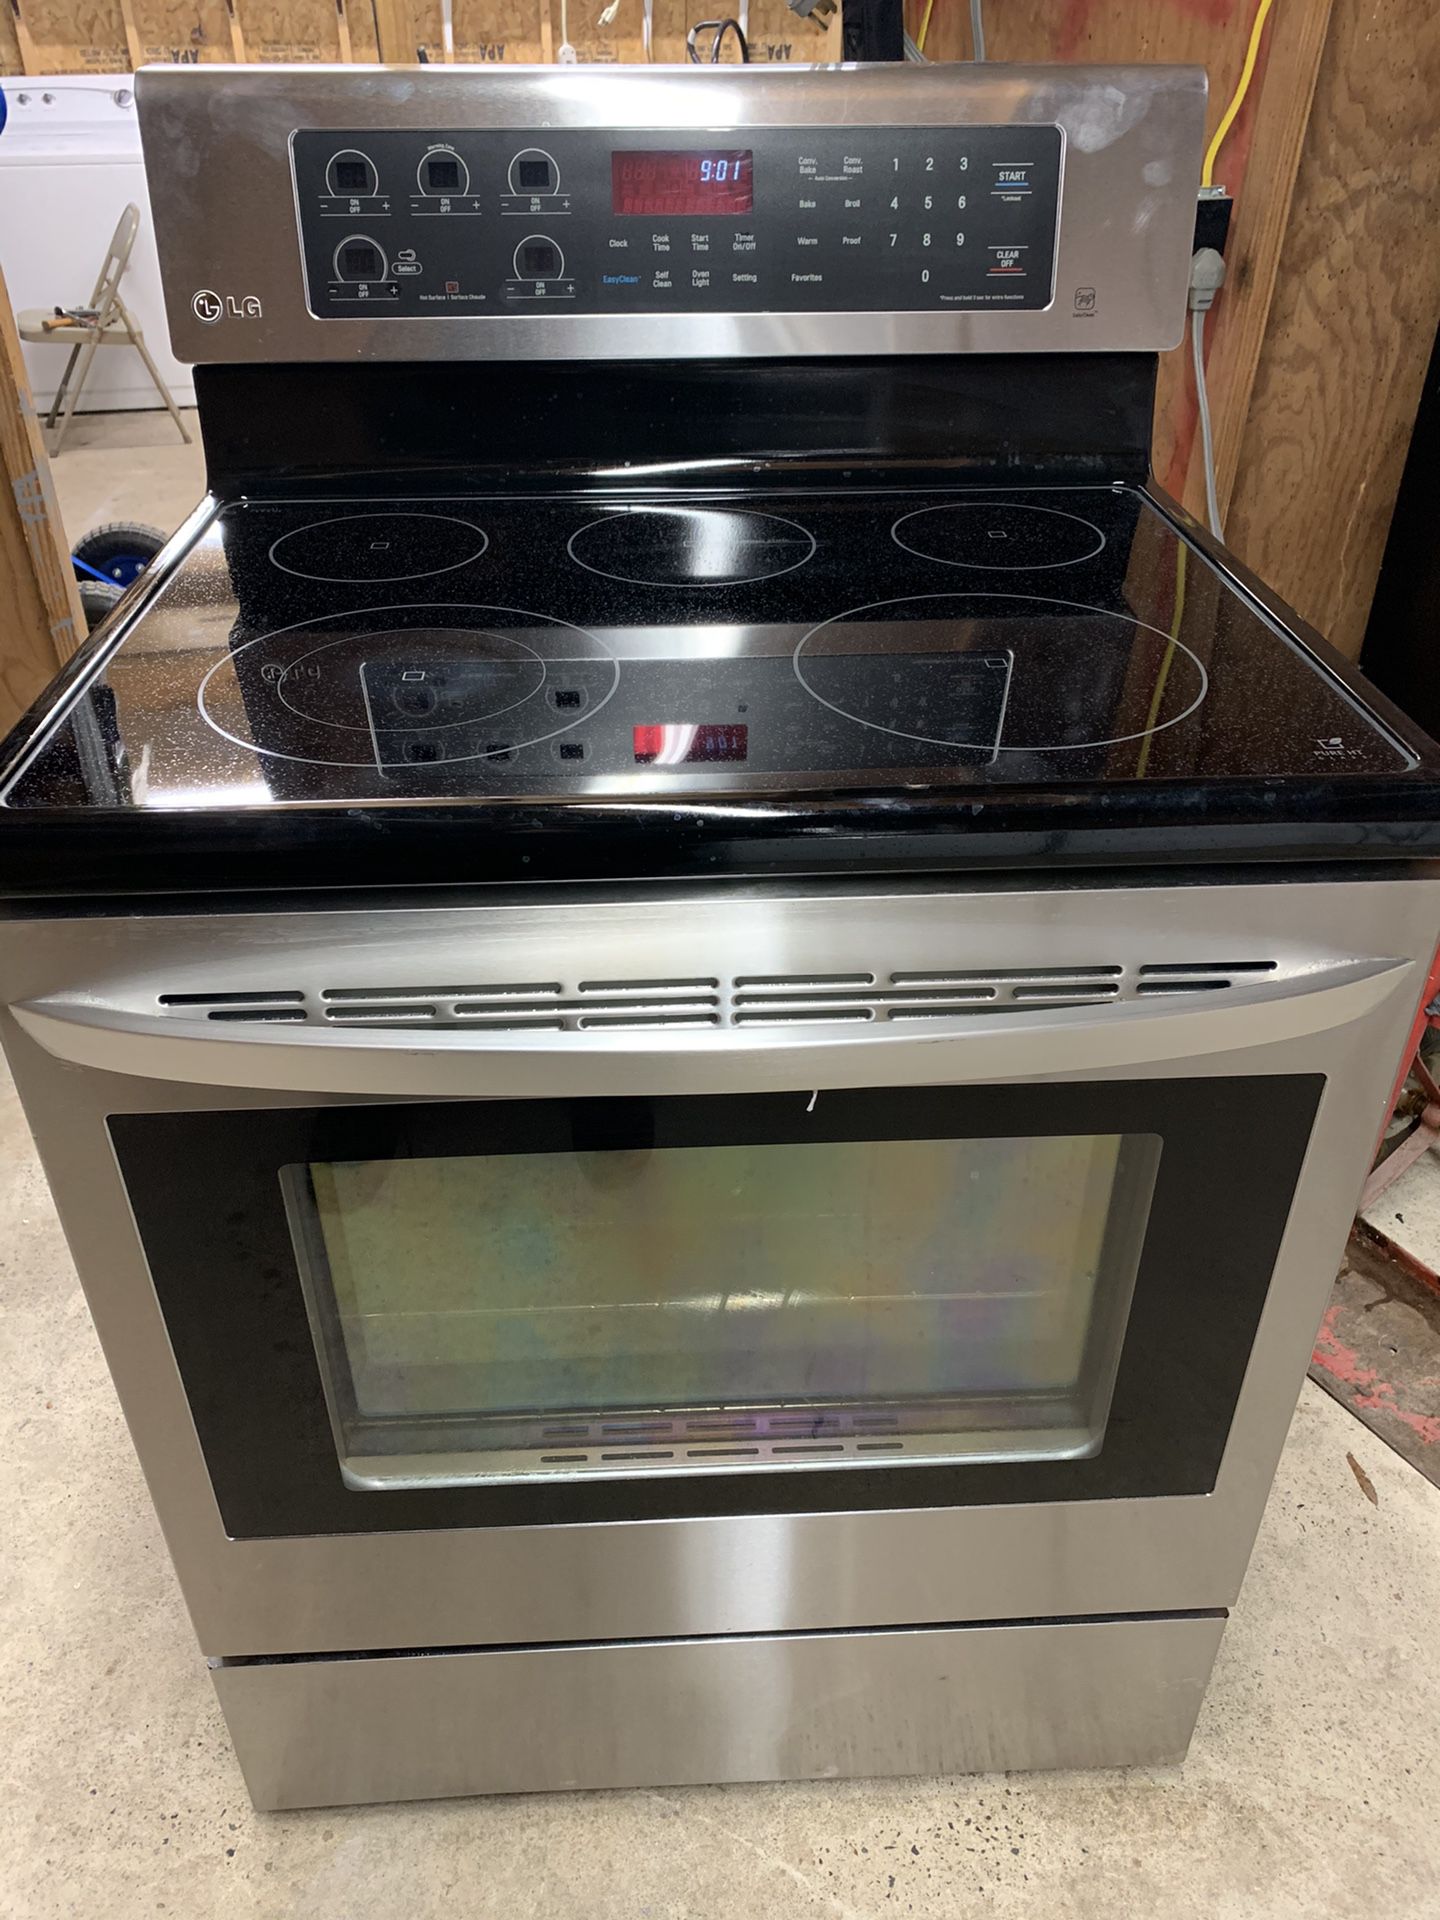 LG ELECTRIC STAINLESS STEEL STOVE SELF CLEAN